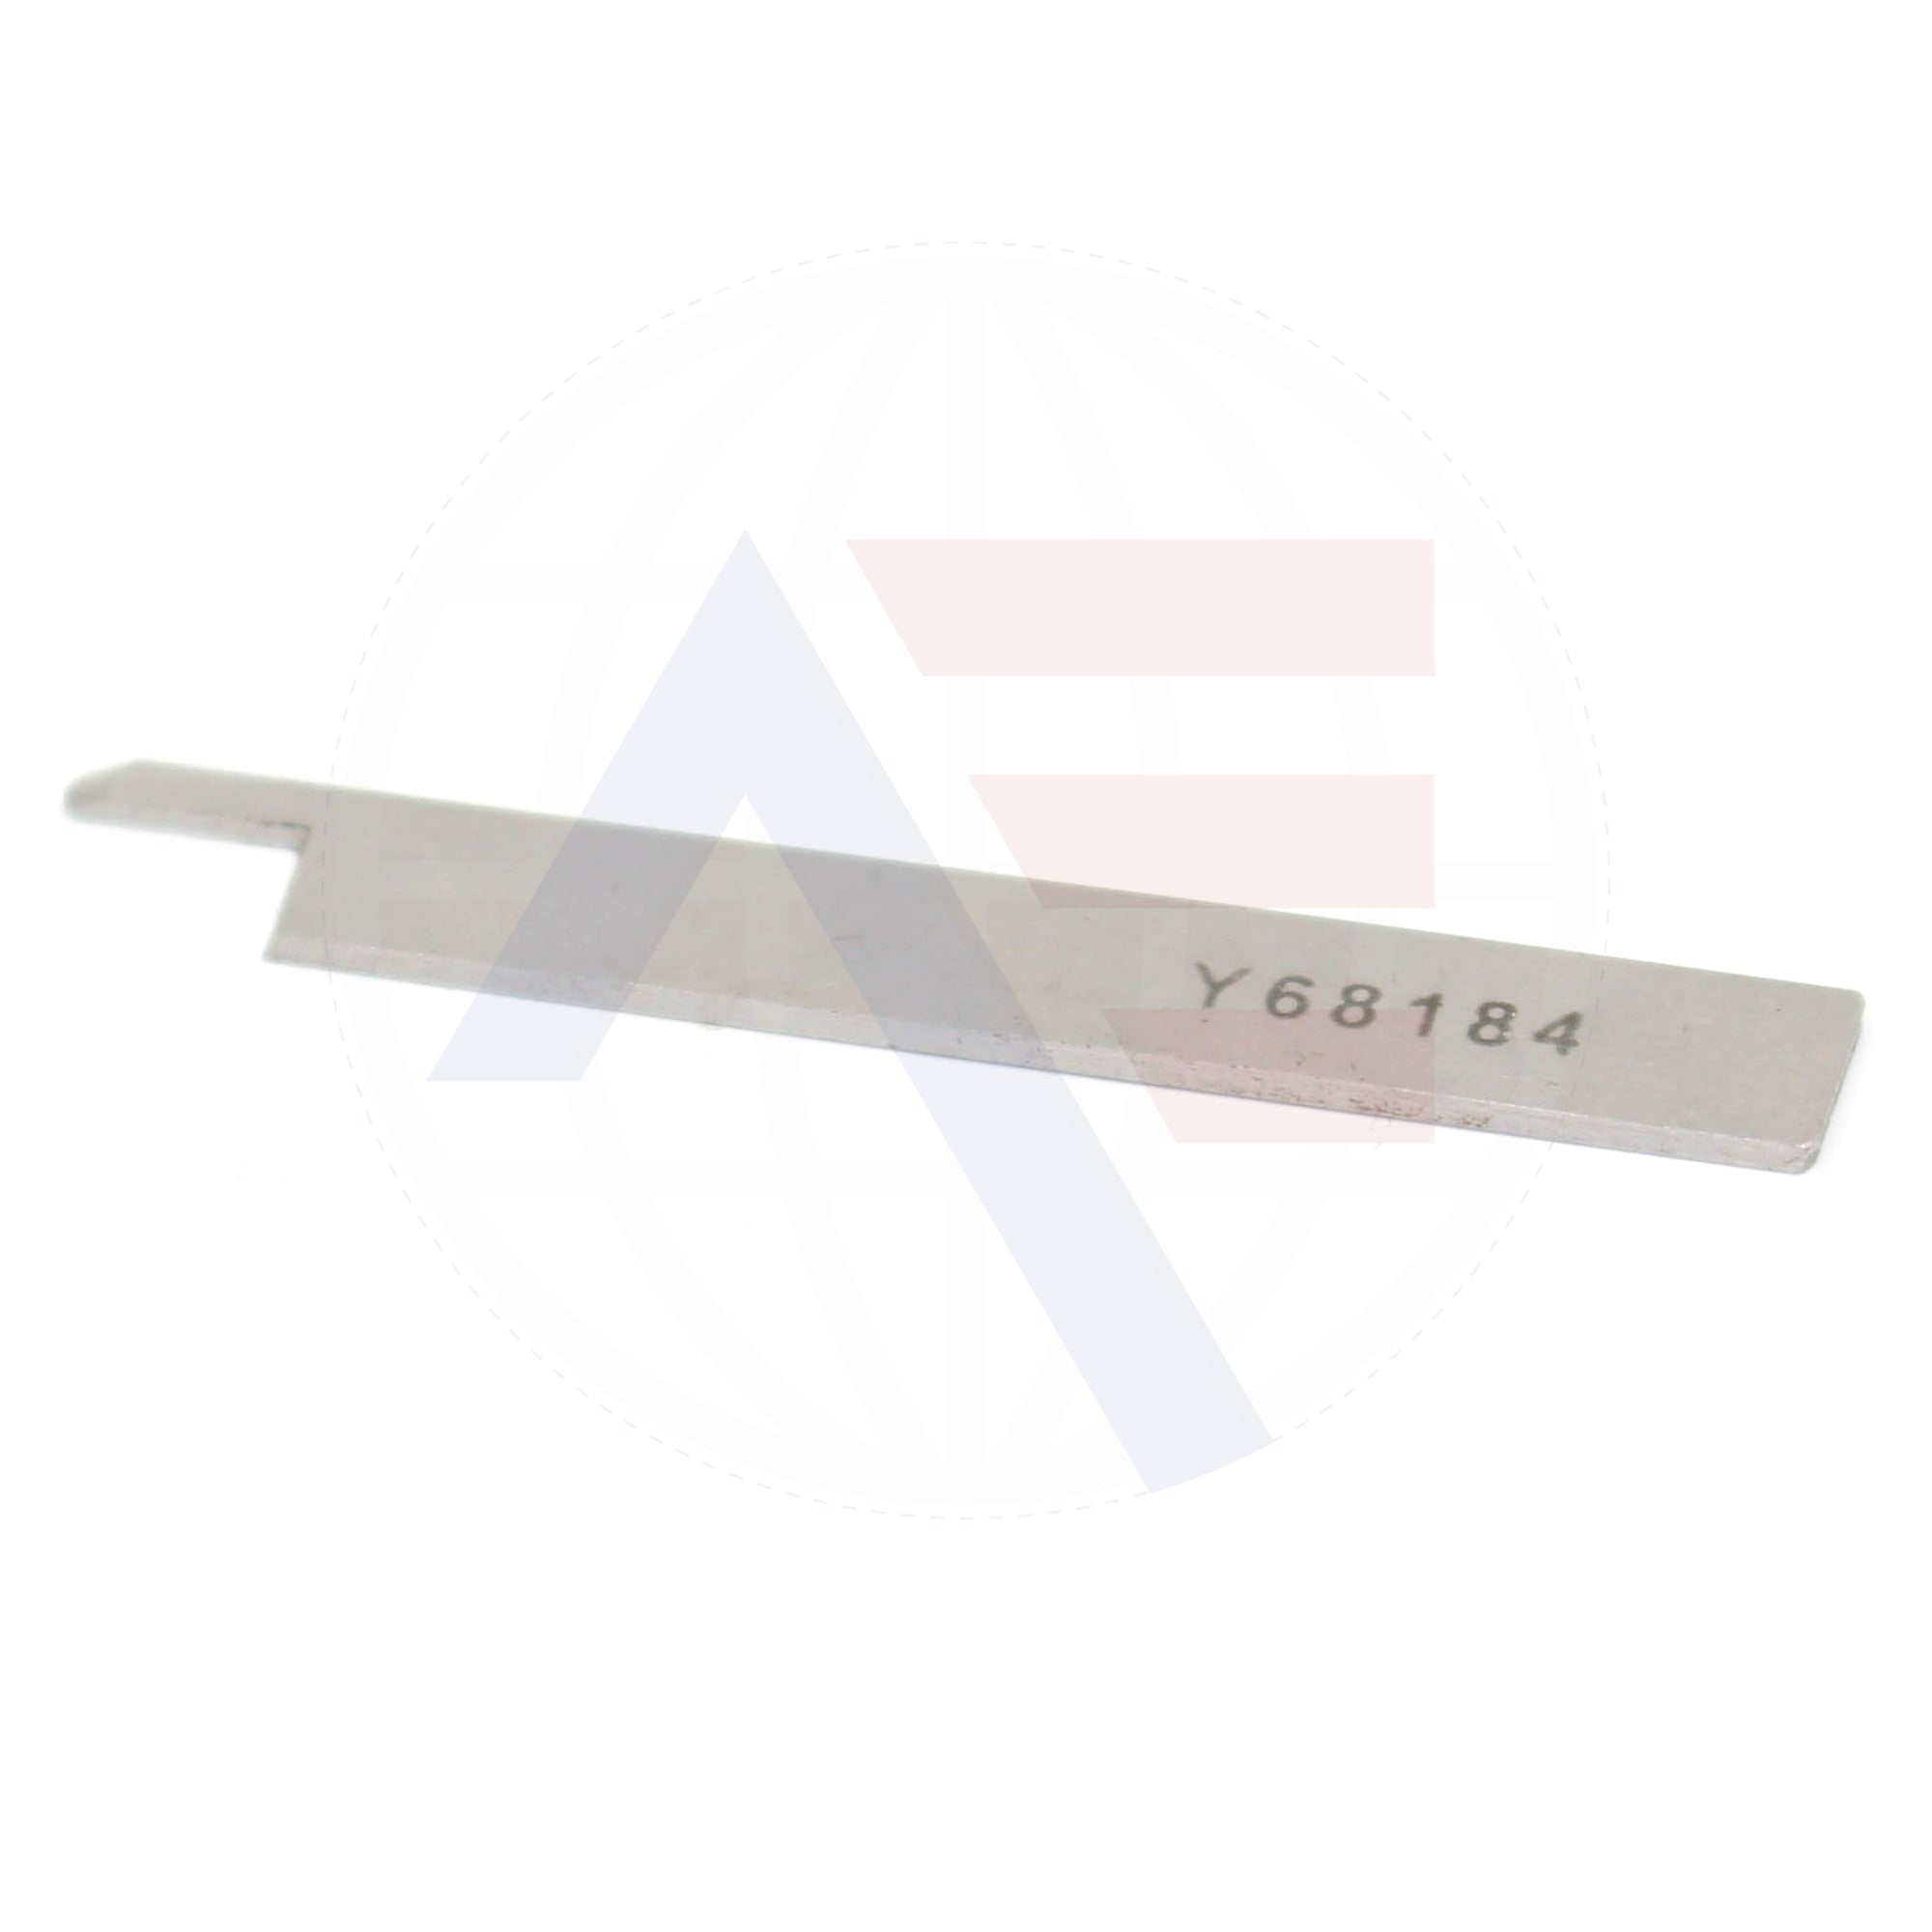 Yamato Y68184 Upper Knife Sewing Machine Spare Parts